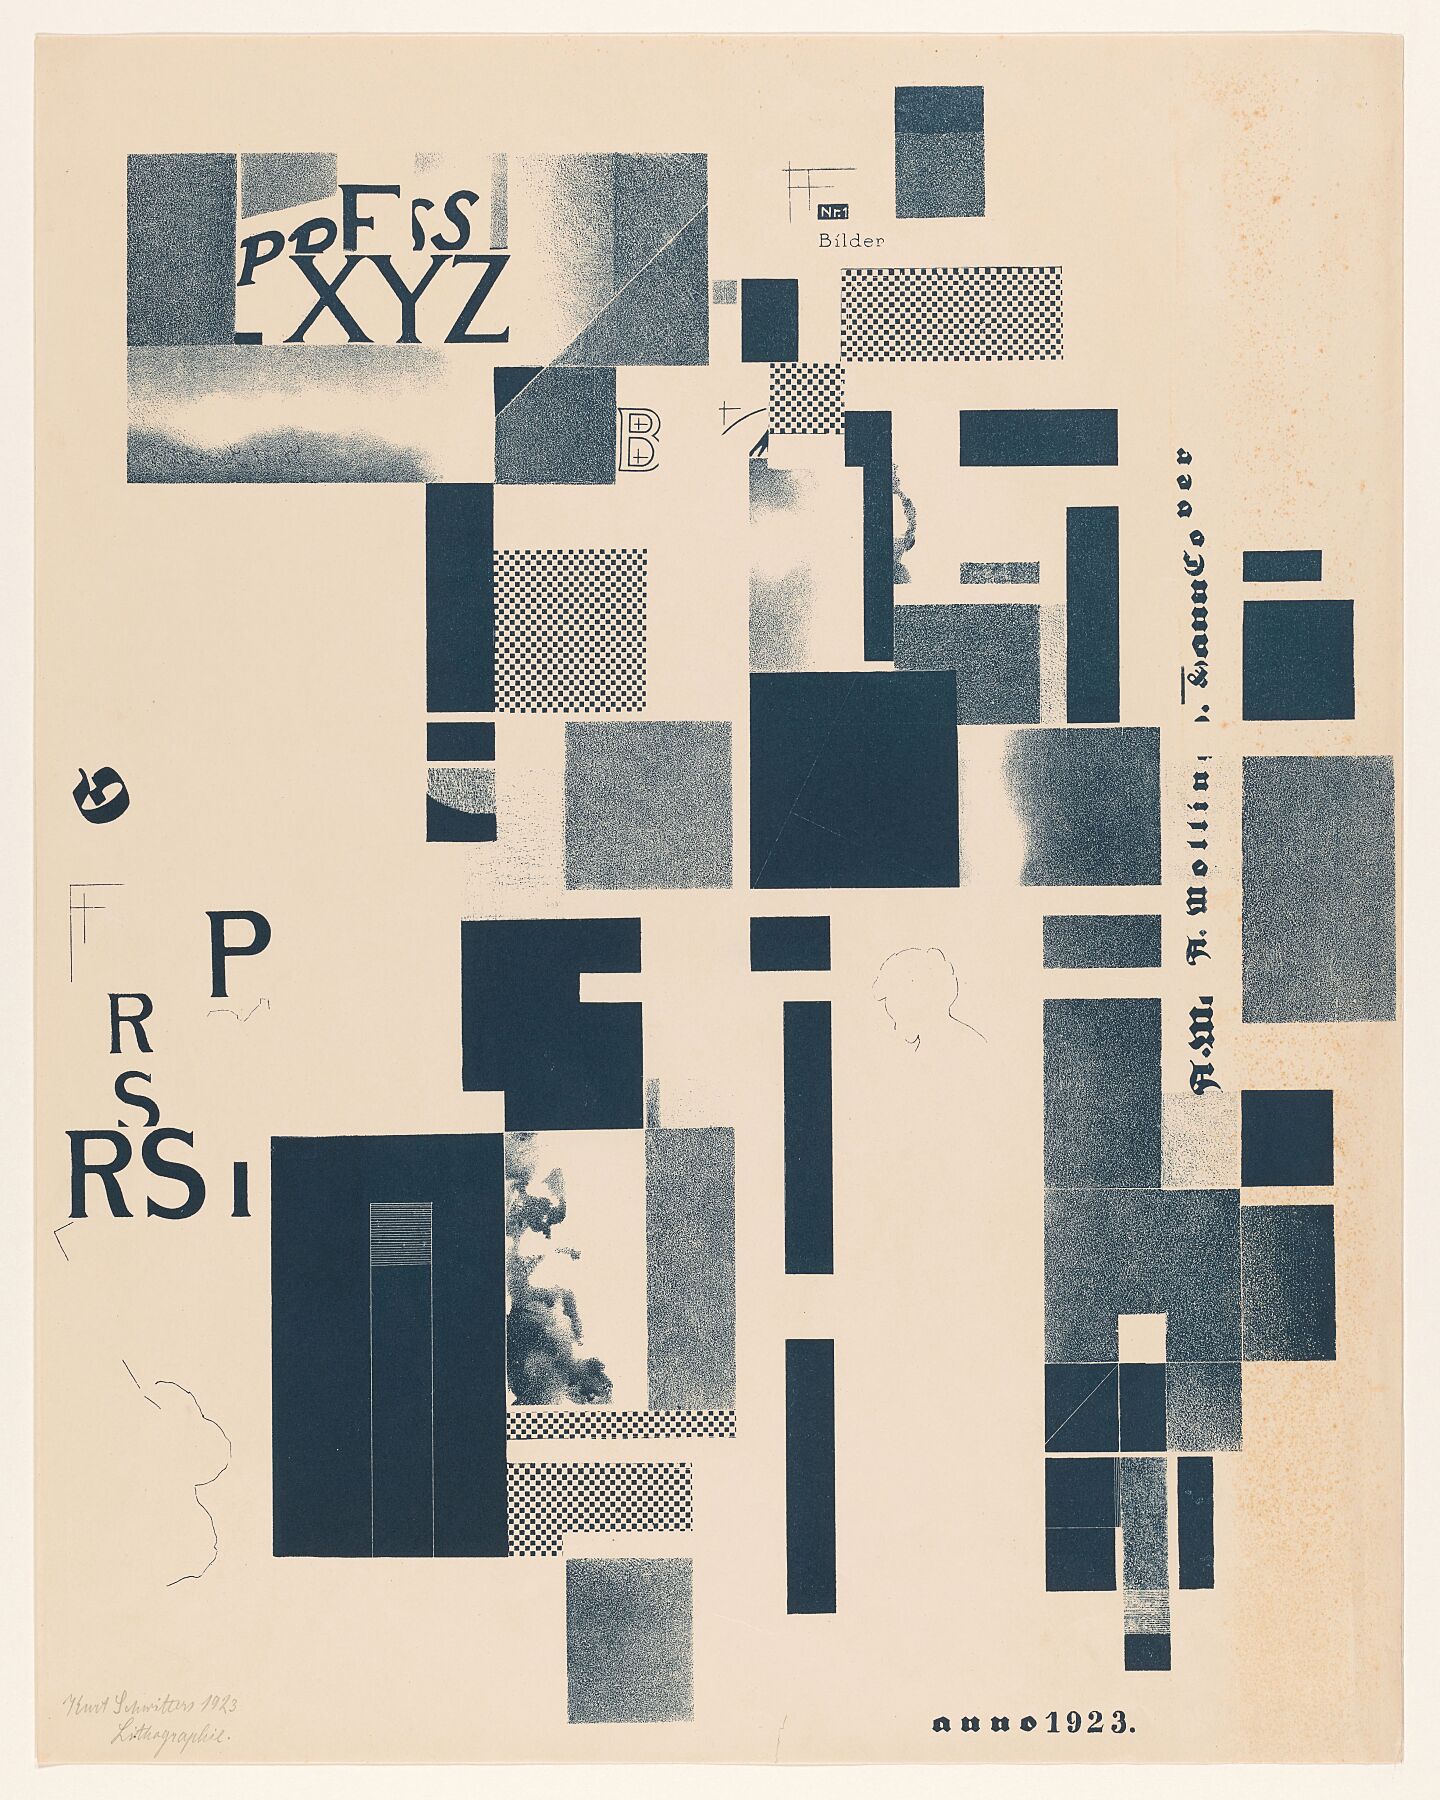 Composition with typographical elements, Kurt Schwitters, 1923